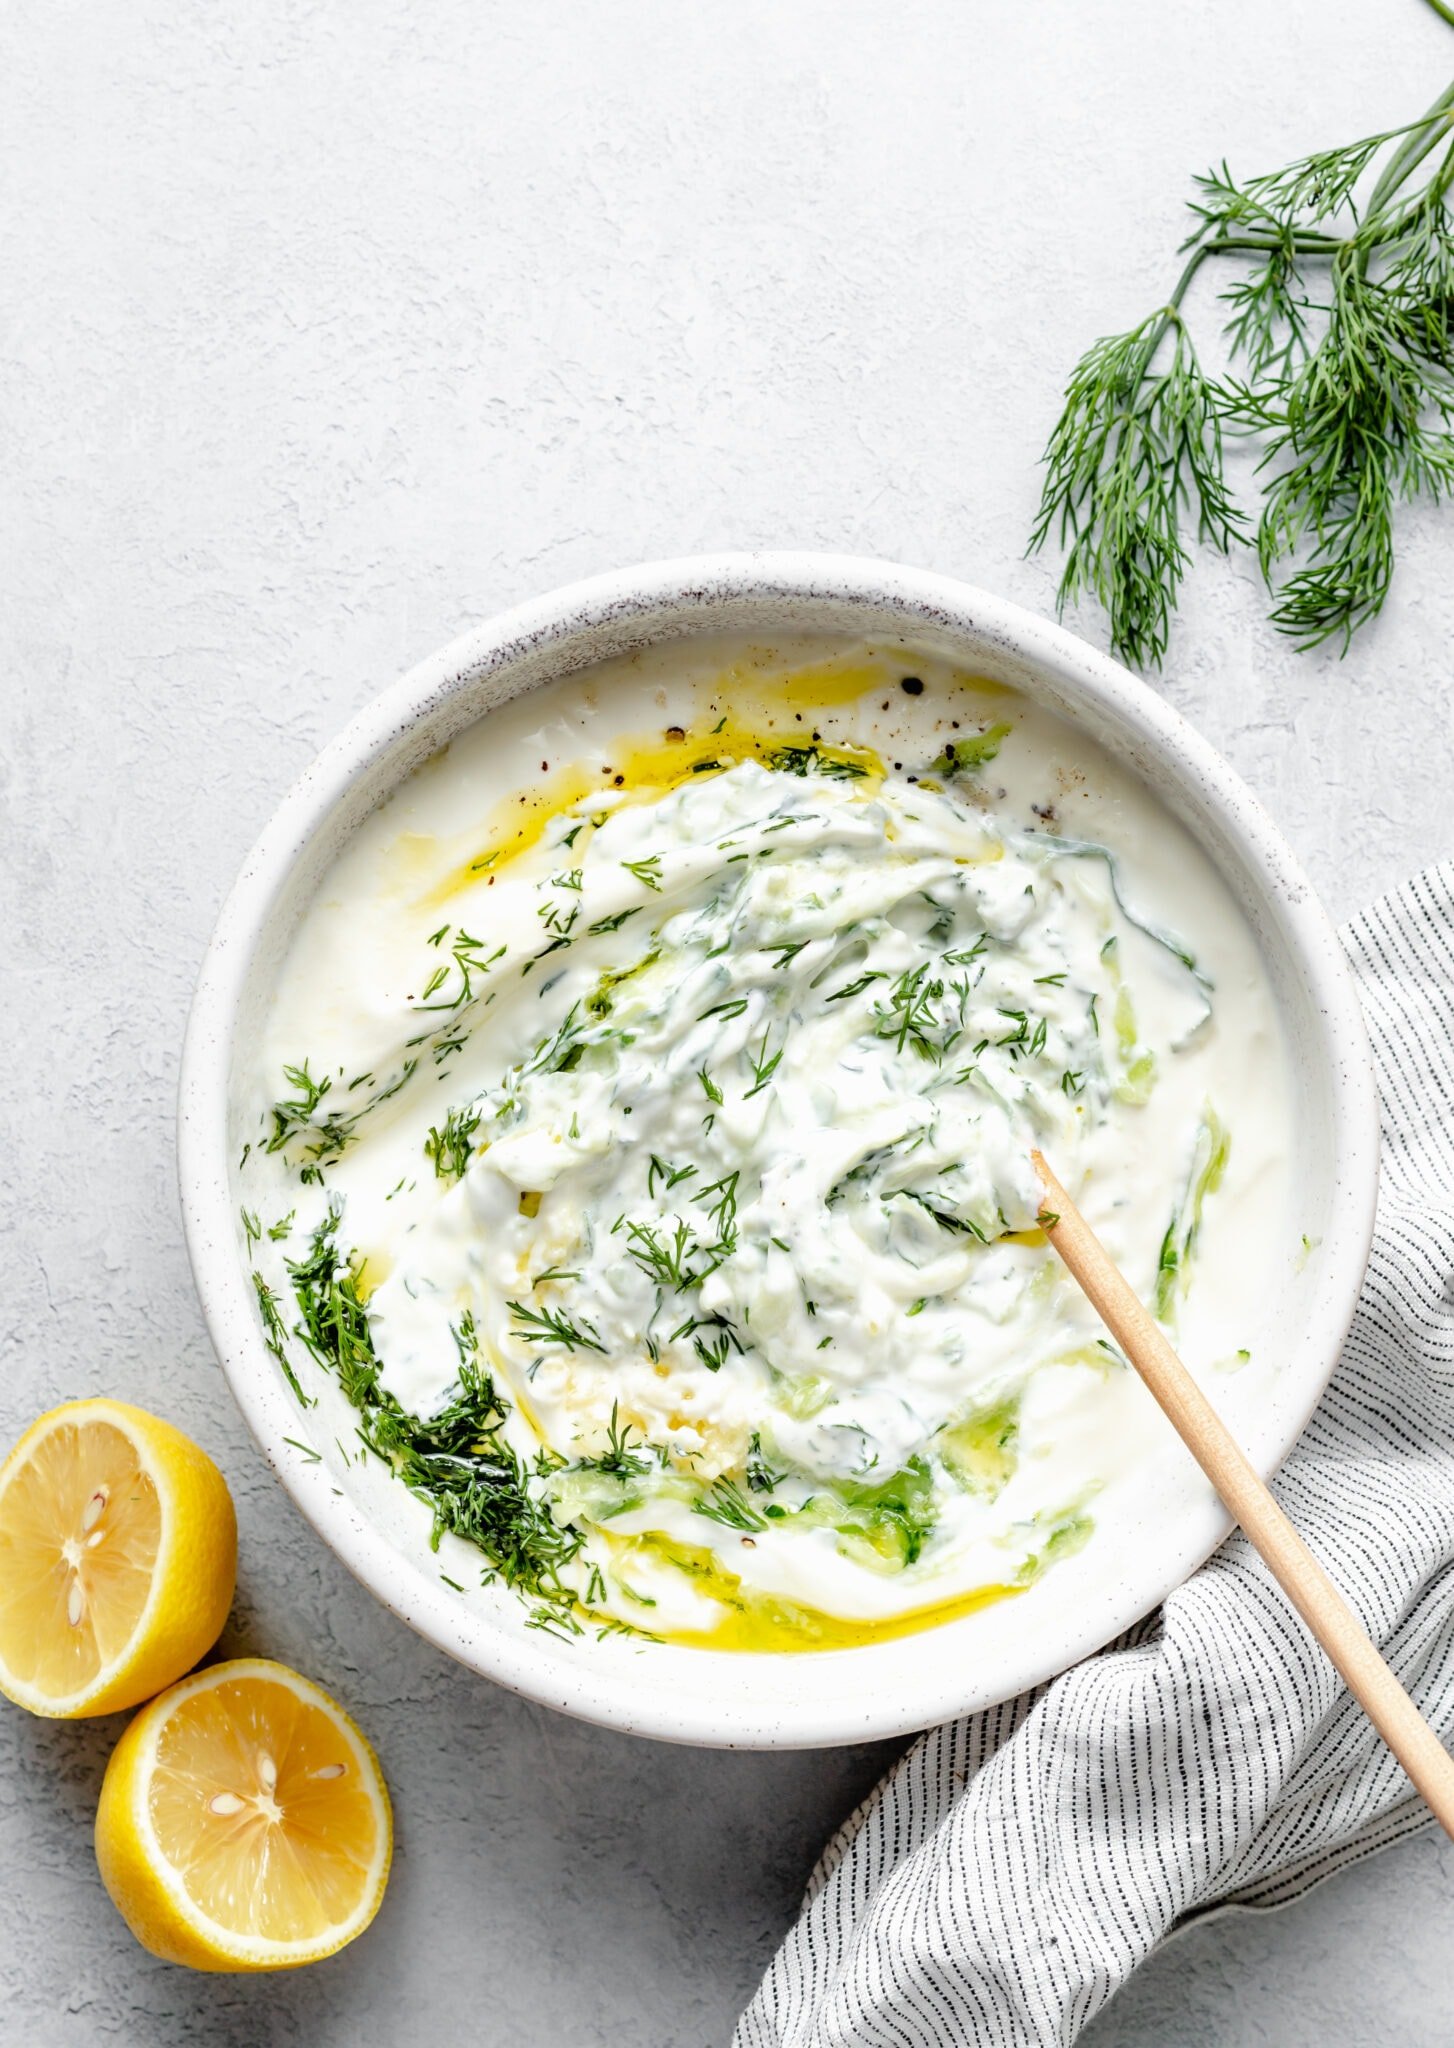 Easy Homemade Tzatziki Sauce - All the Healthy Things